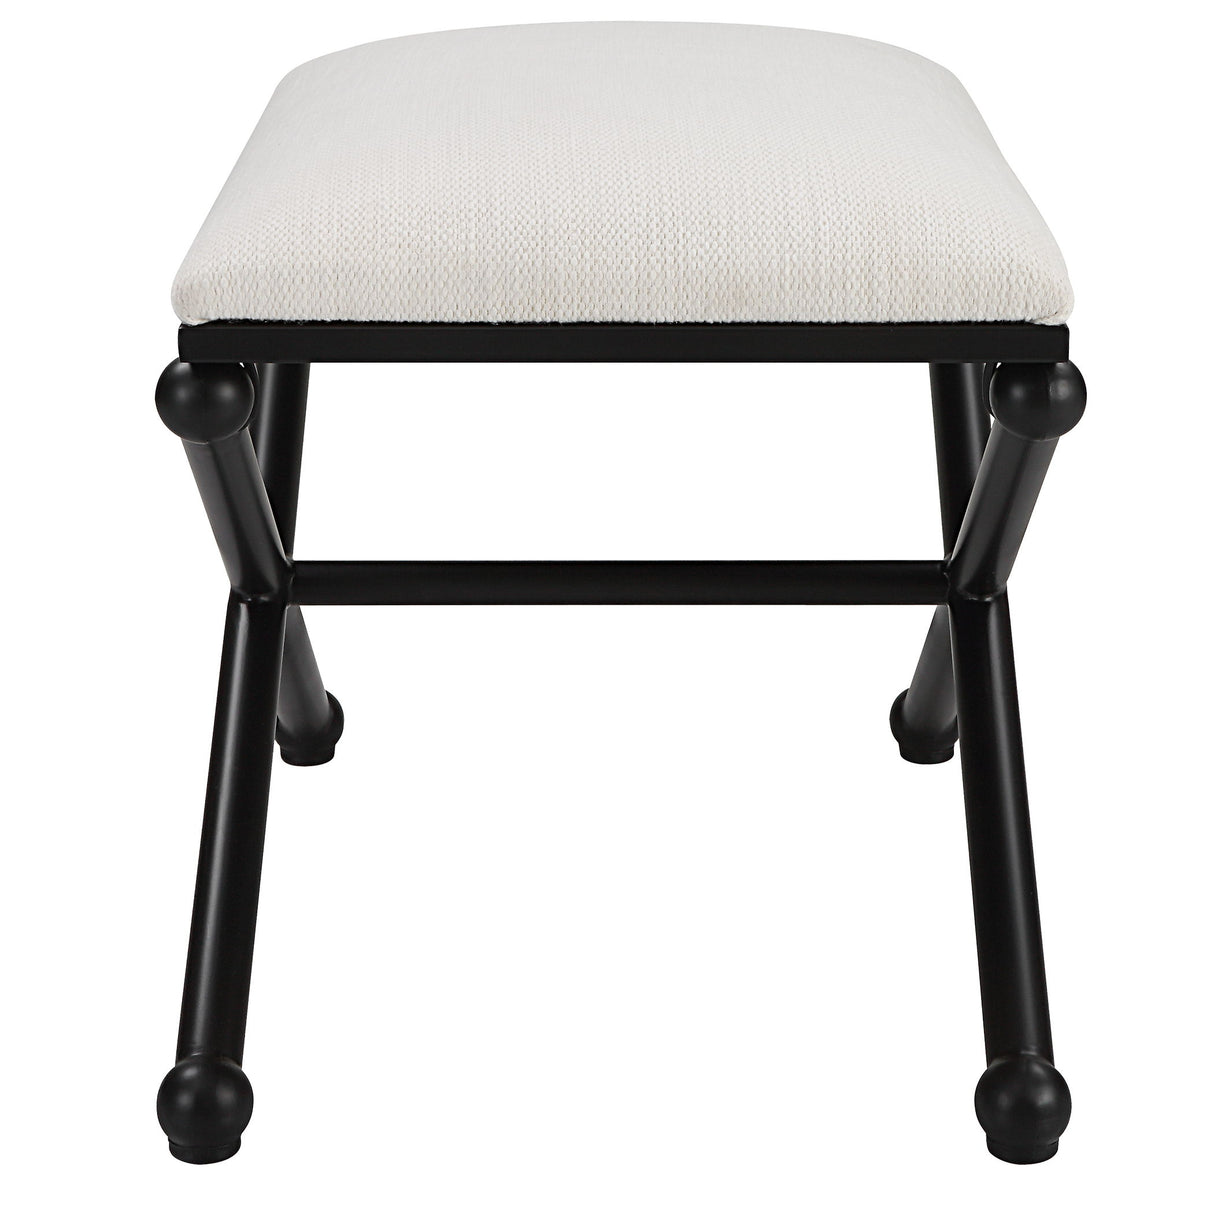 Andrews - Small Bench - White